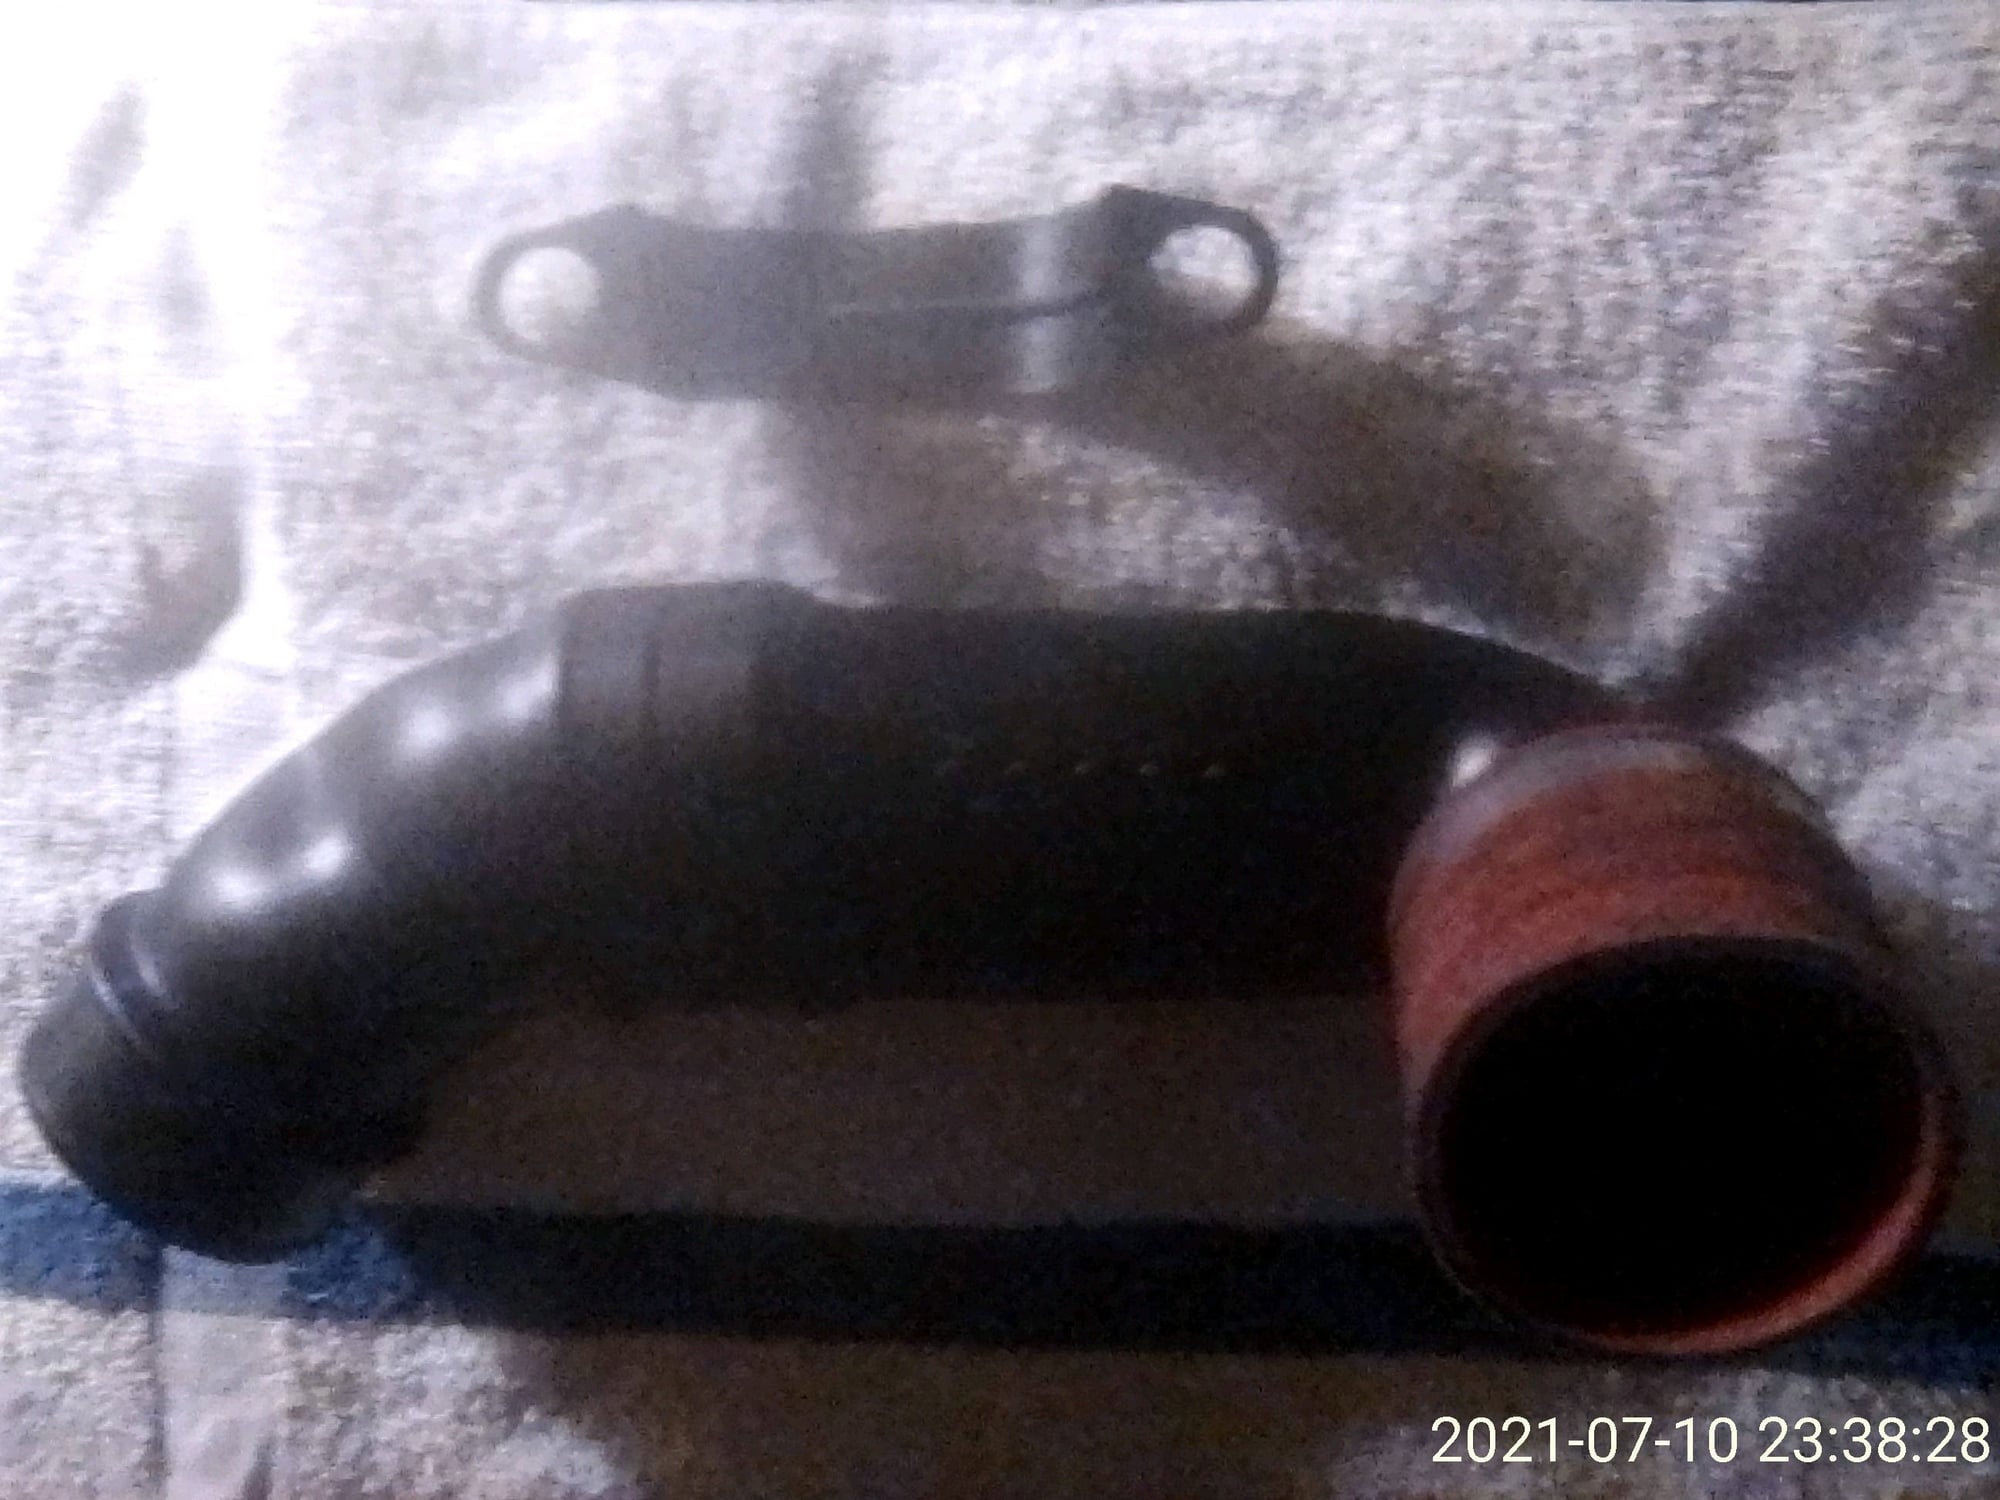 Miscellaneous - FD OEM Crossover Air Intake Pipe & Bracket - Used - San Jose, CA 95121, United States